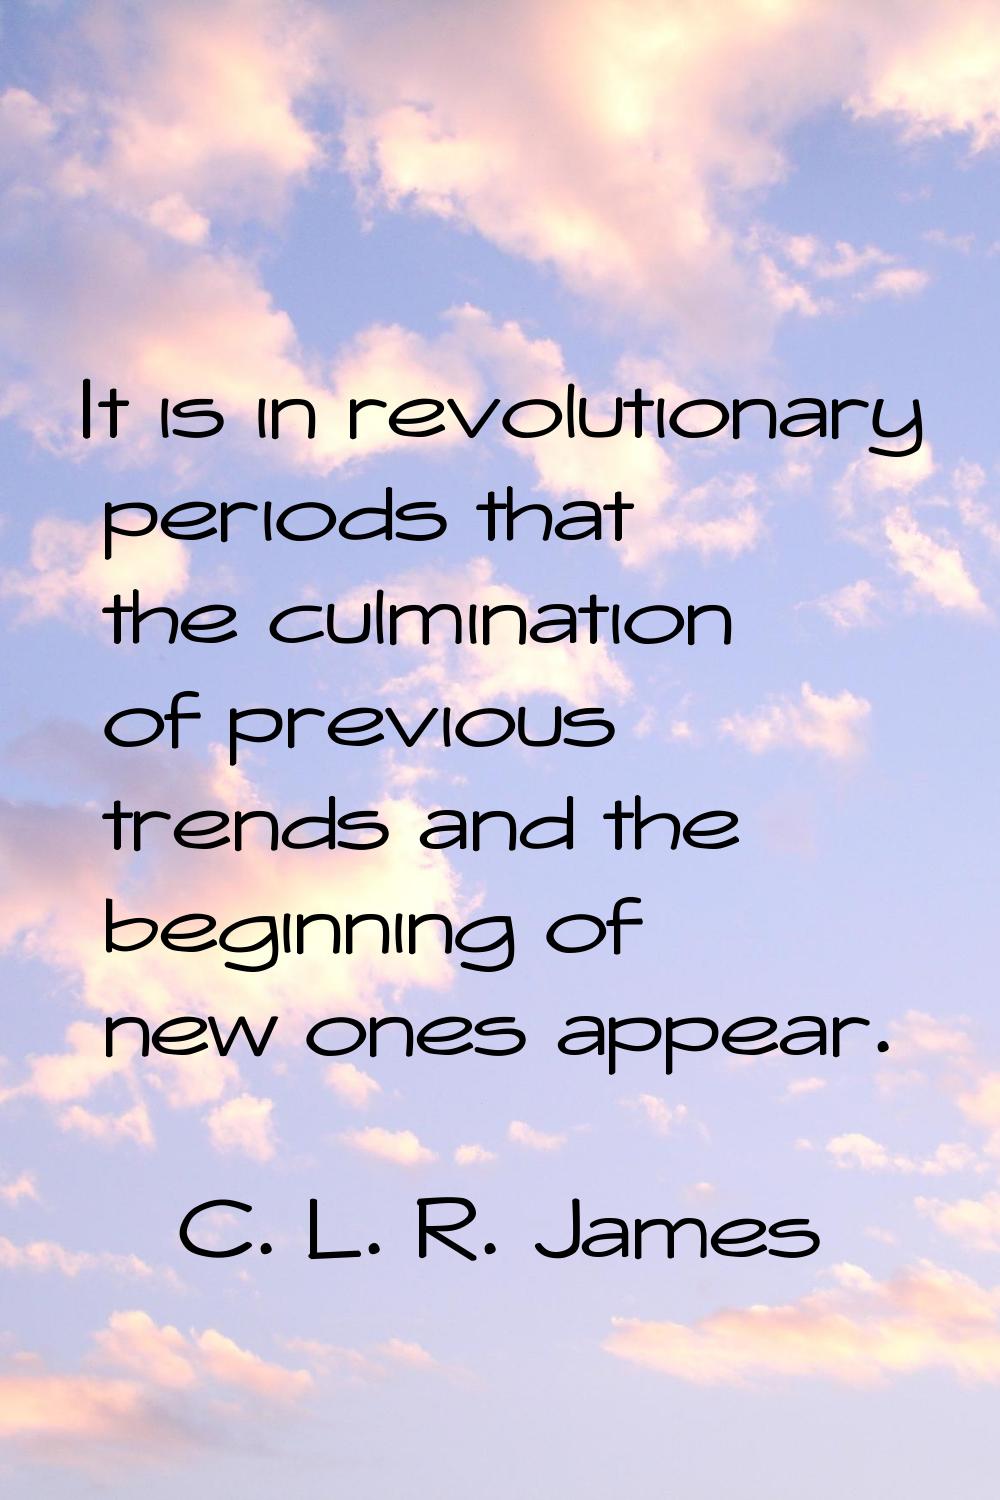 It is in revolutionary periods that the culmination of previous trends and the beginning of new one